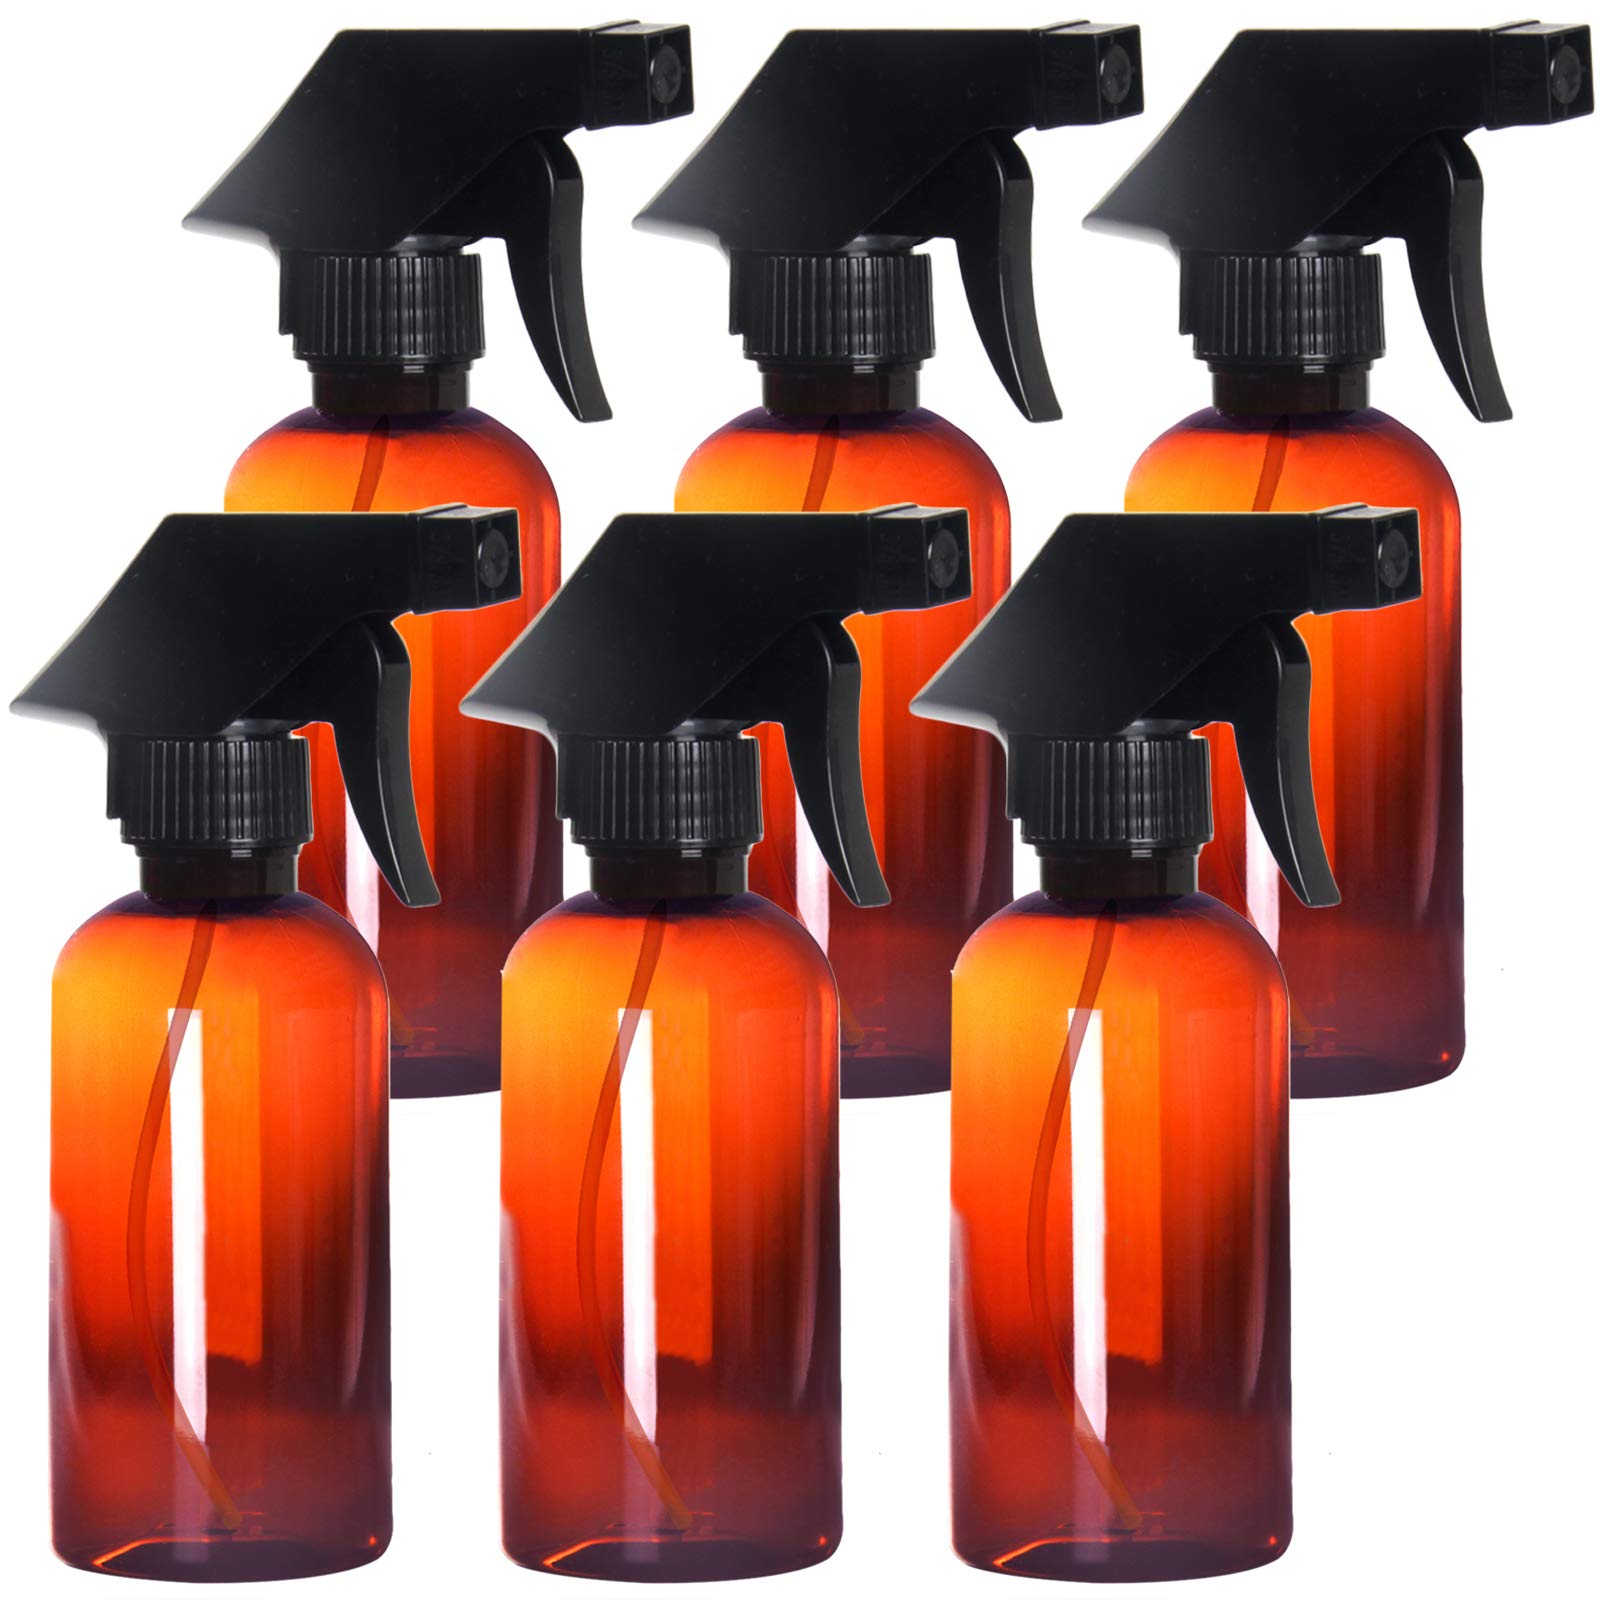 8 Oz Empty Plastic Spray Bottles with Adjustable Nozzle - Durable Trigger  Sprayer with Mist & Stream